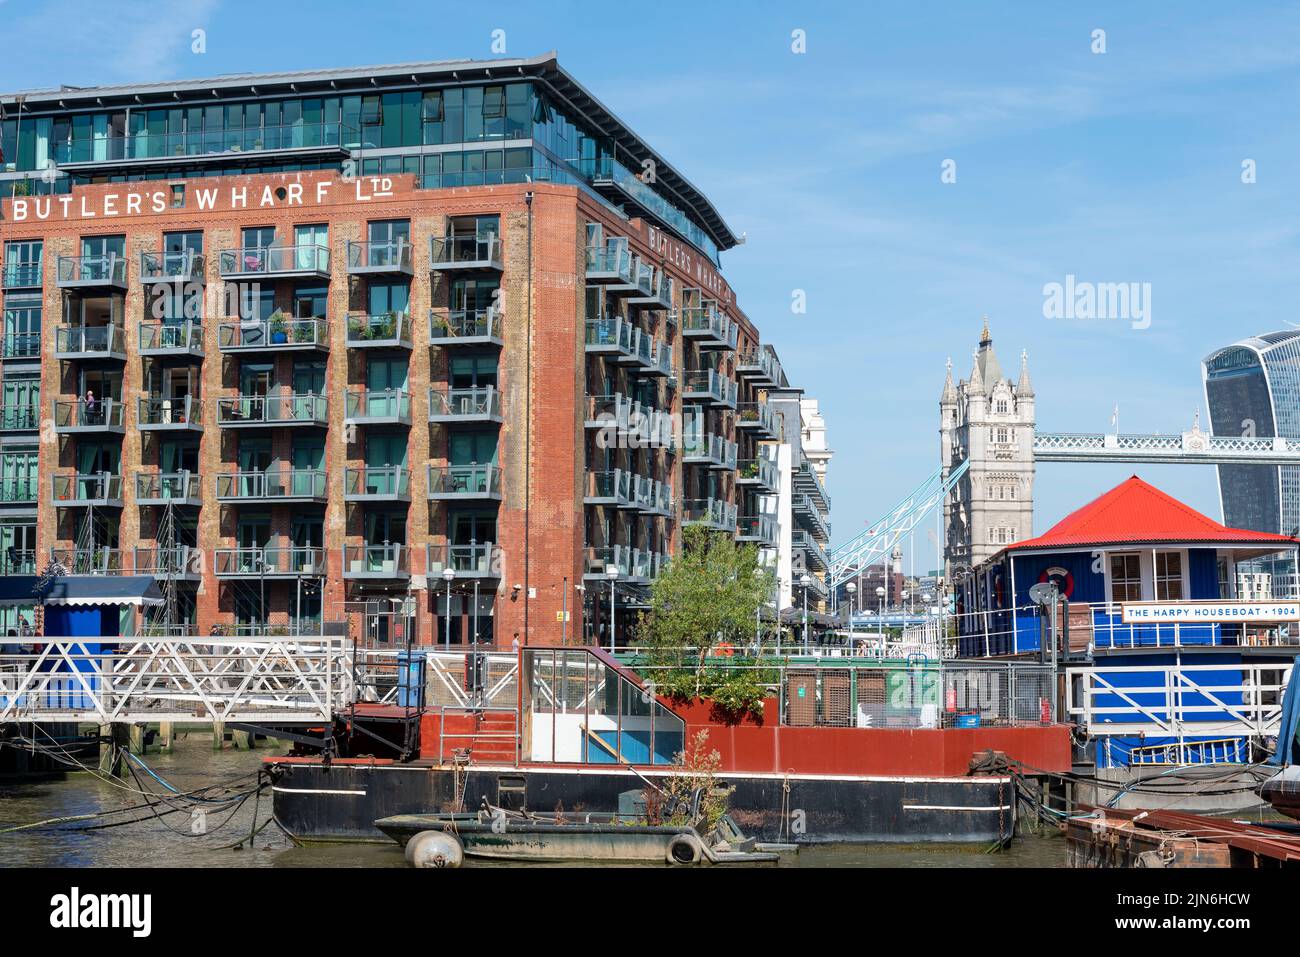 Butler's Wharf, historic developed building at Shad Thames on south bank of the River Thames, near London's Tower Bridge. The Harpy Houseboat on river Stock Photo